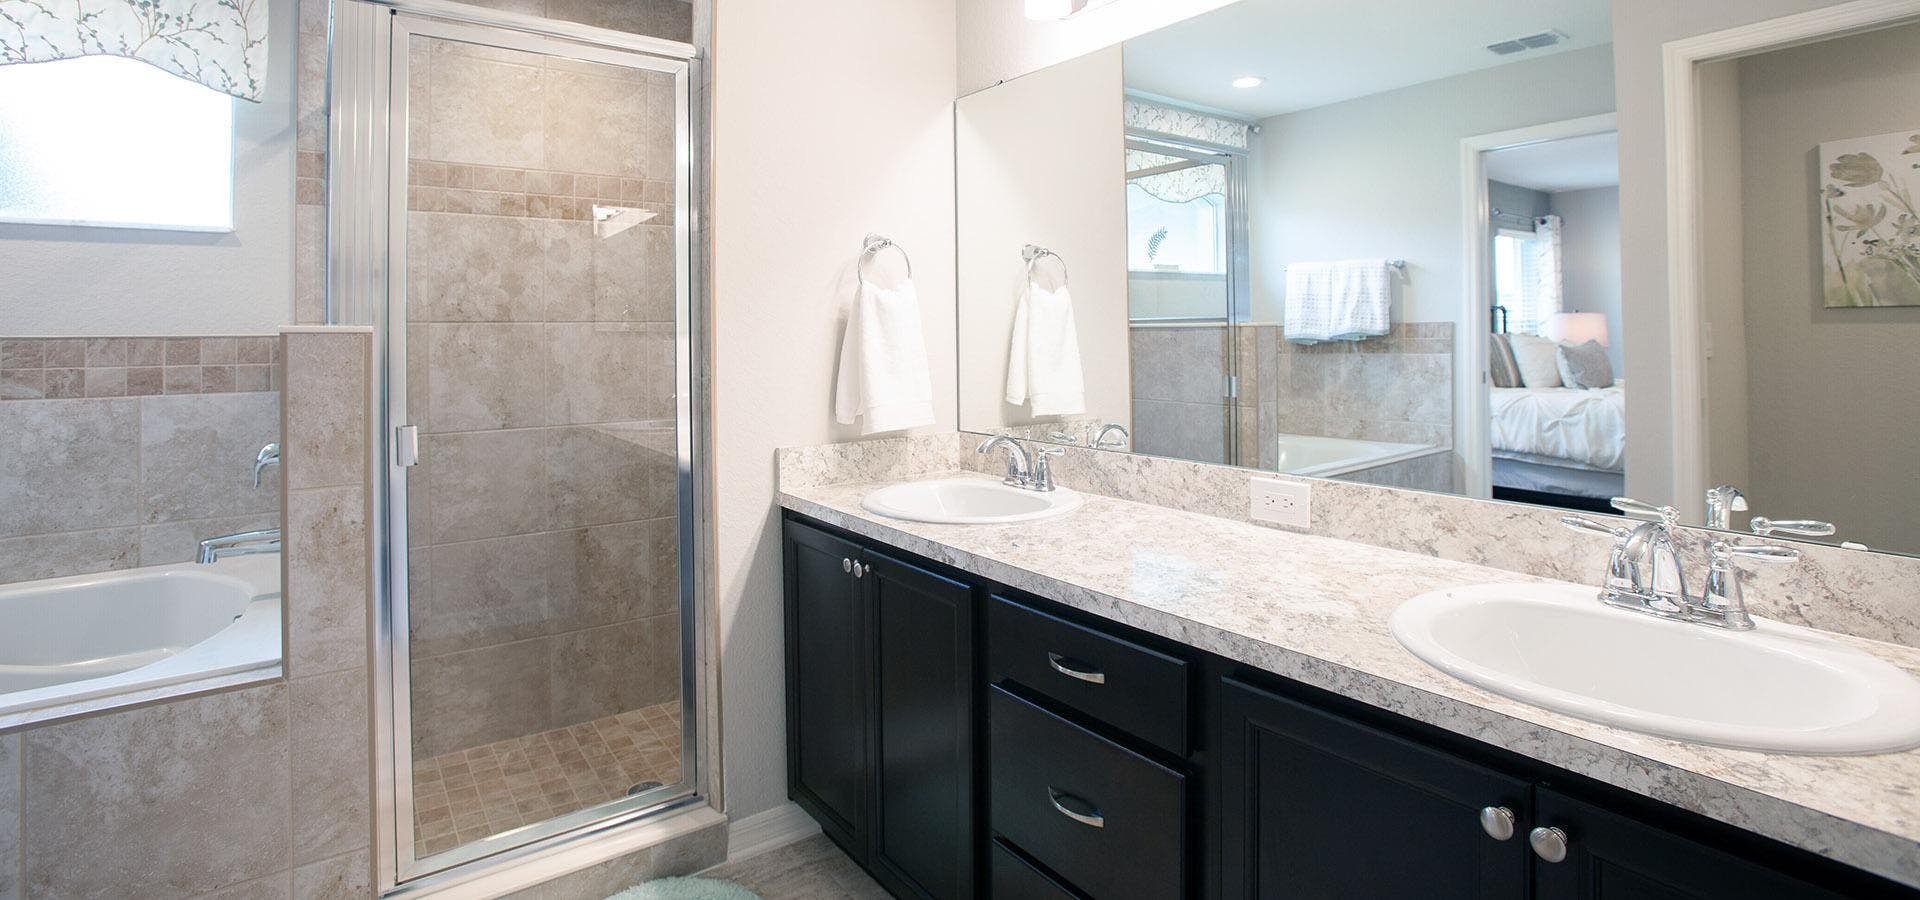 Luxurious en-suite bathroom from Highland Homes